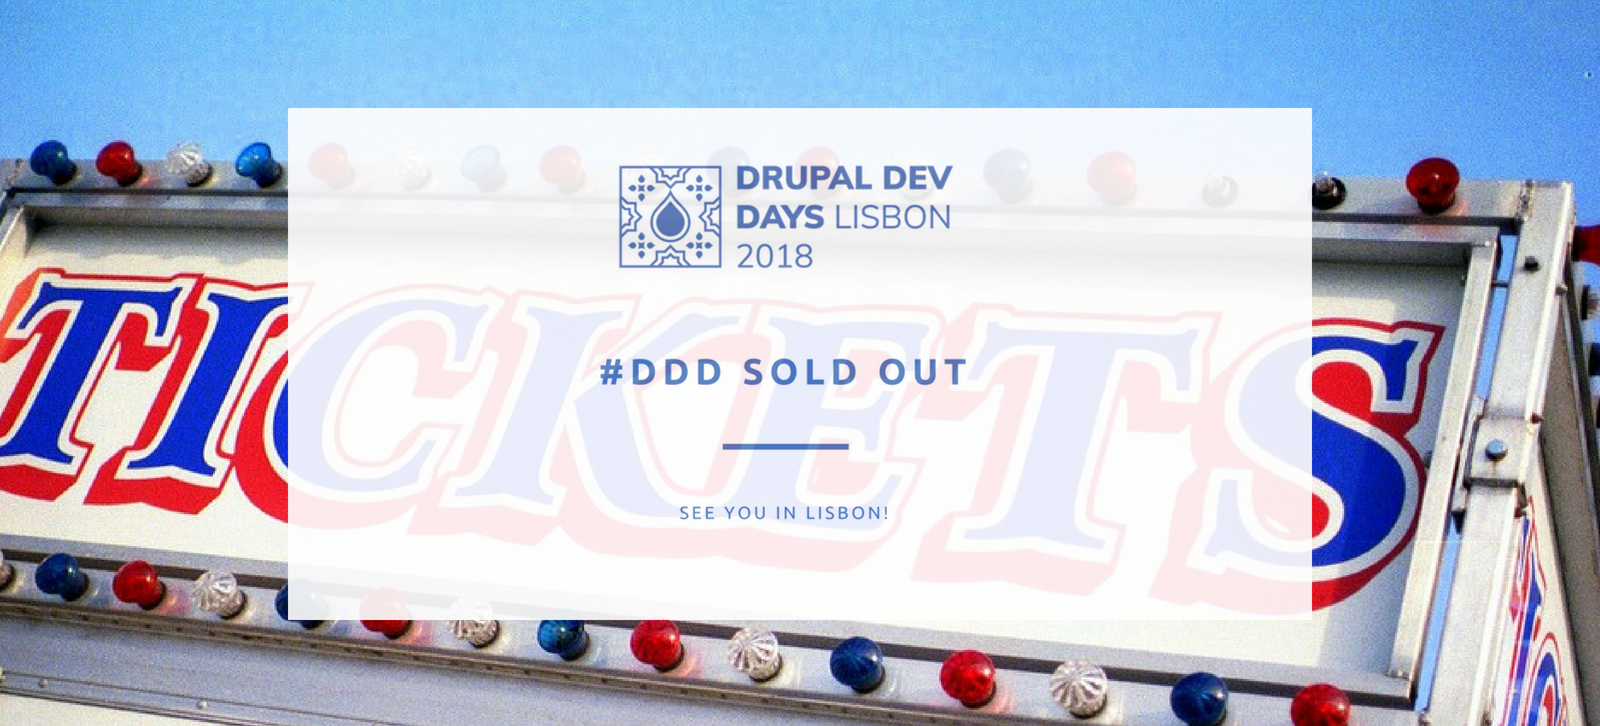 ddd tickets sold out